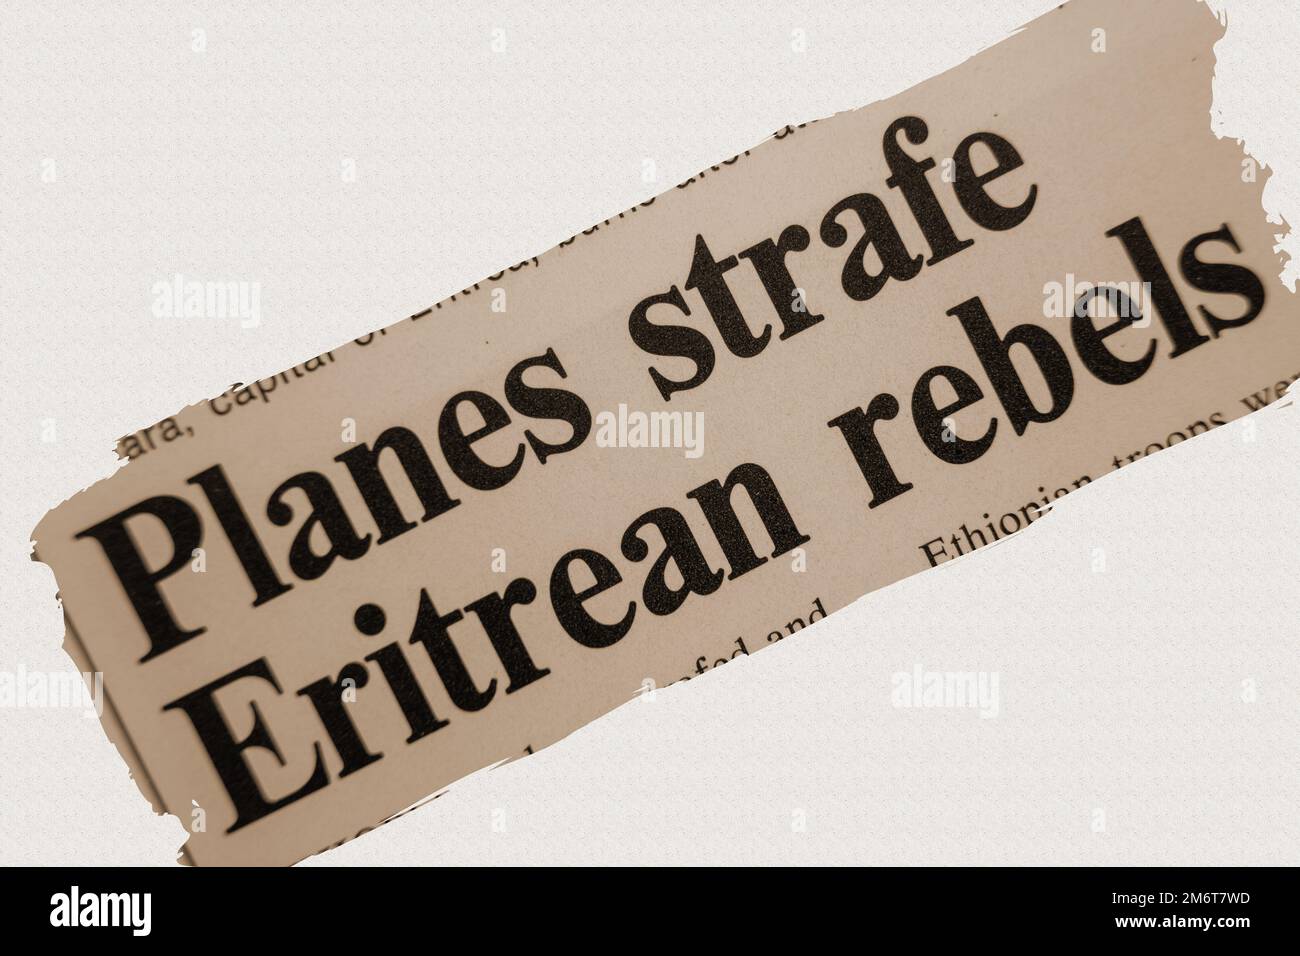 news story from 1975 newspaper headline article title - Planes strike Eritrean rebels - sepia Stock Photo